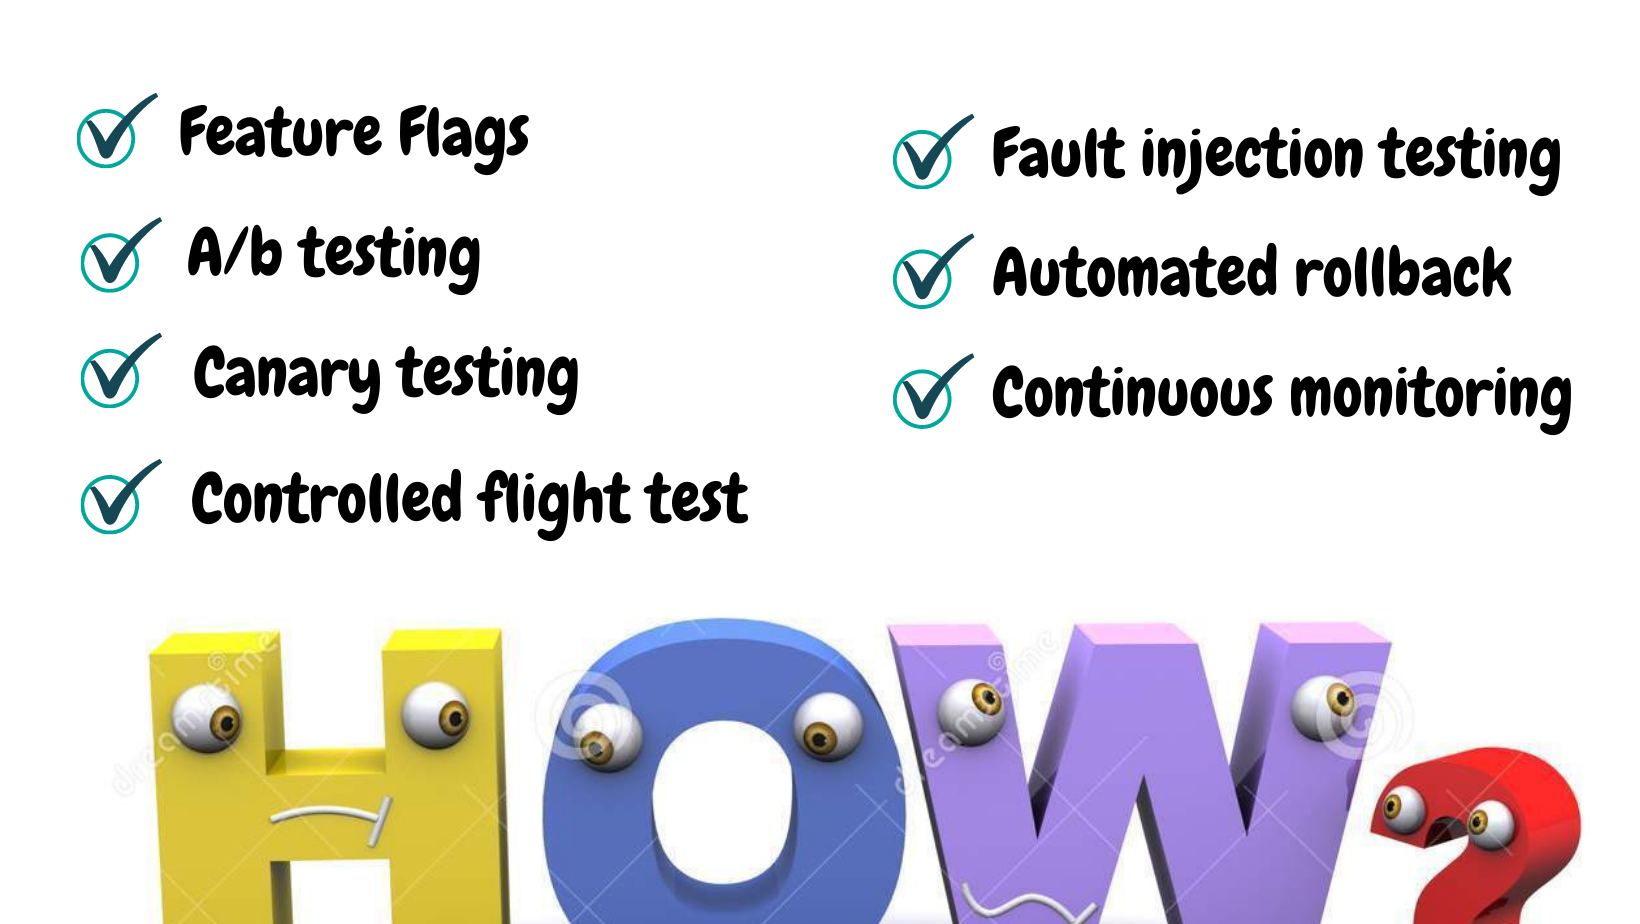 The different ways of testing in production are written in points.